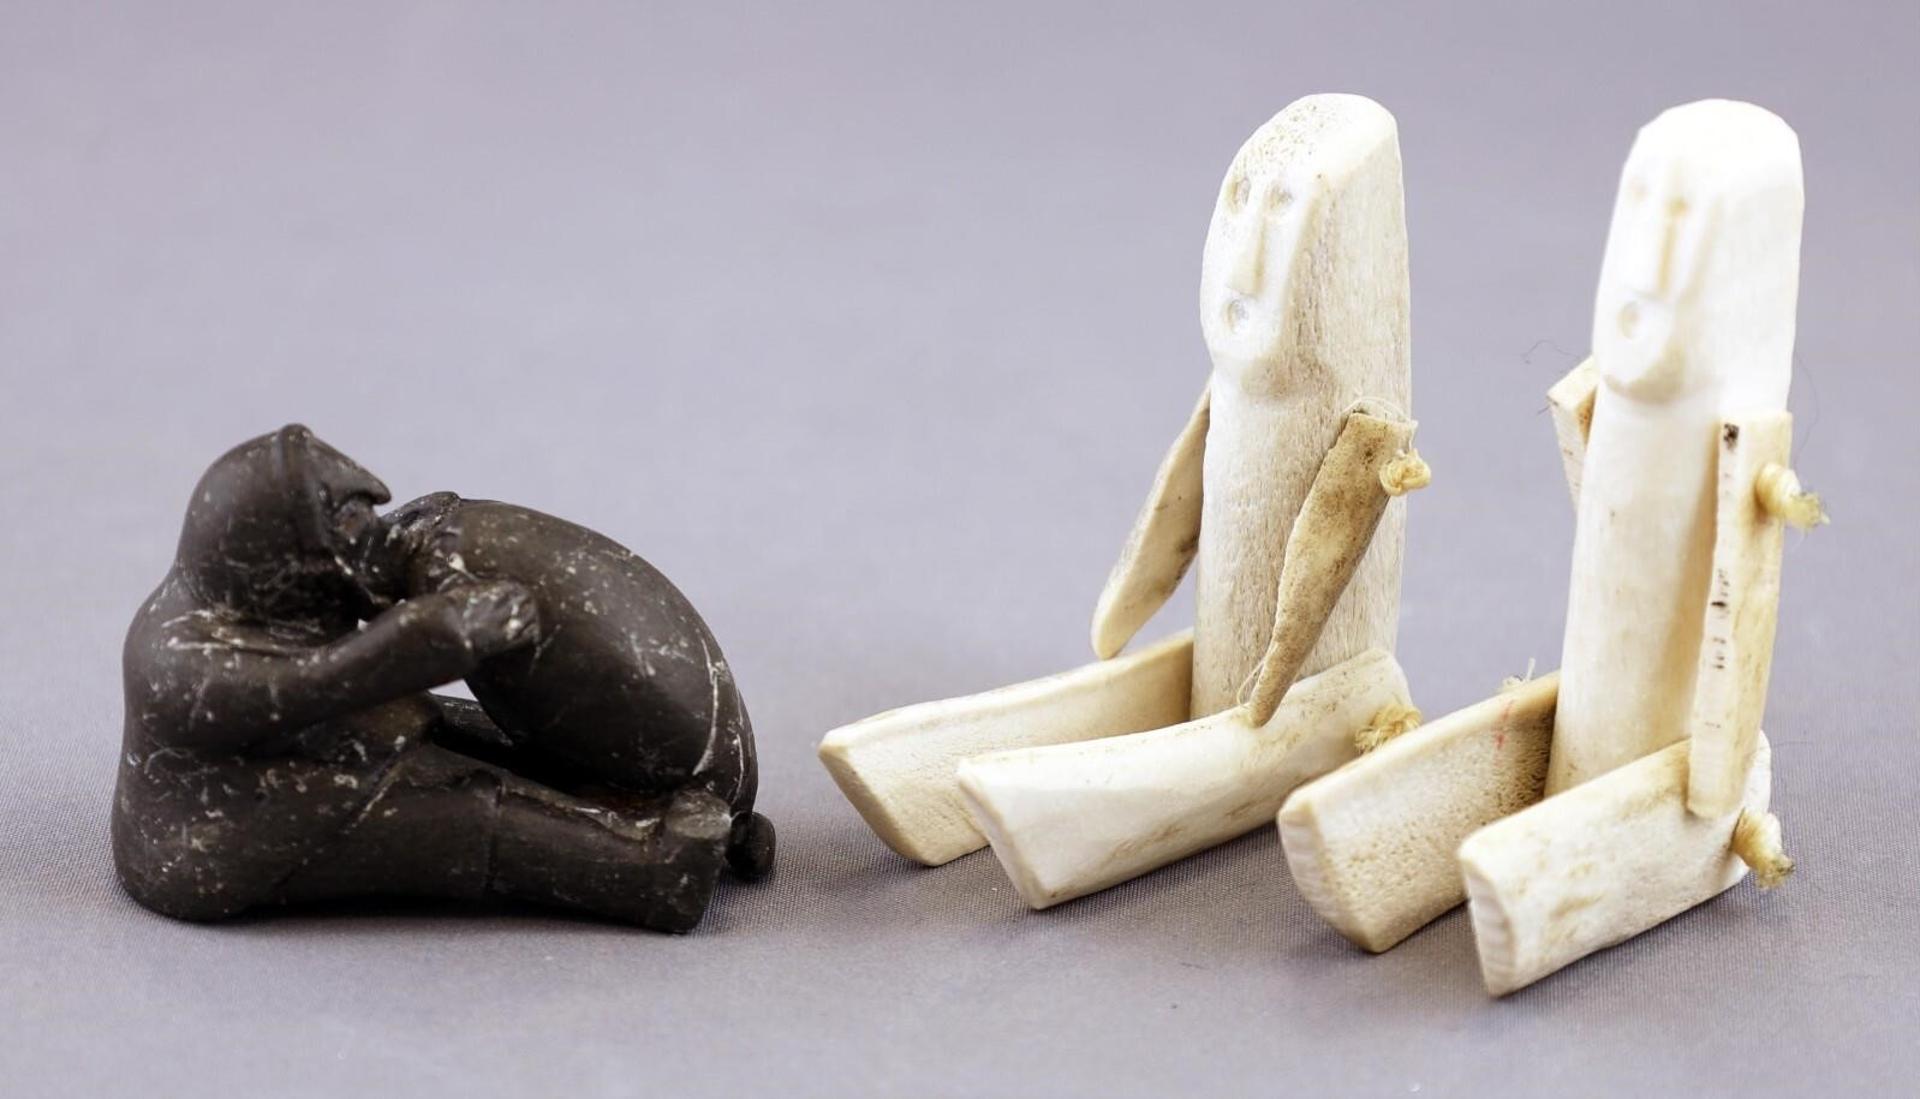 Miniature Inuit Carvings - two articulated bone dolls (heights 3.5 and 3 in.)